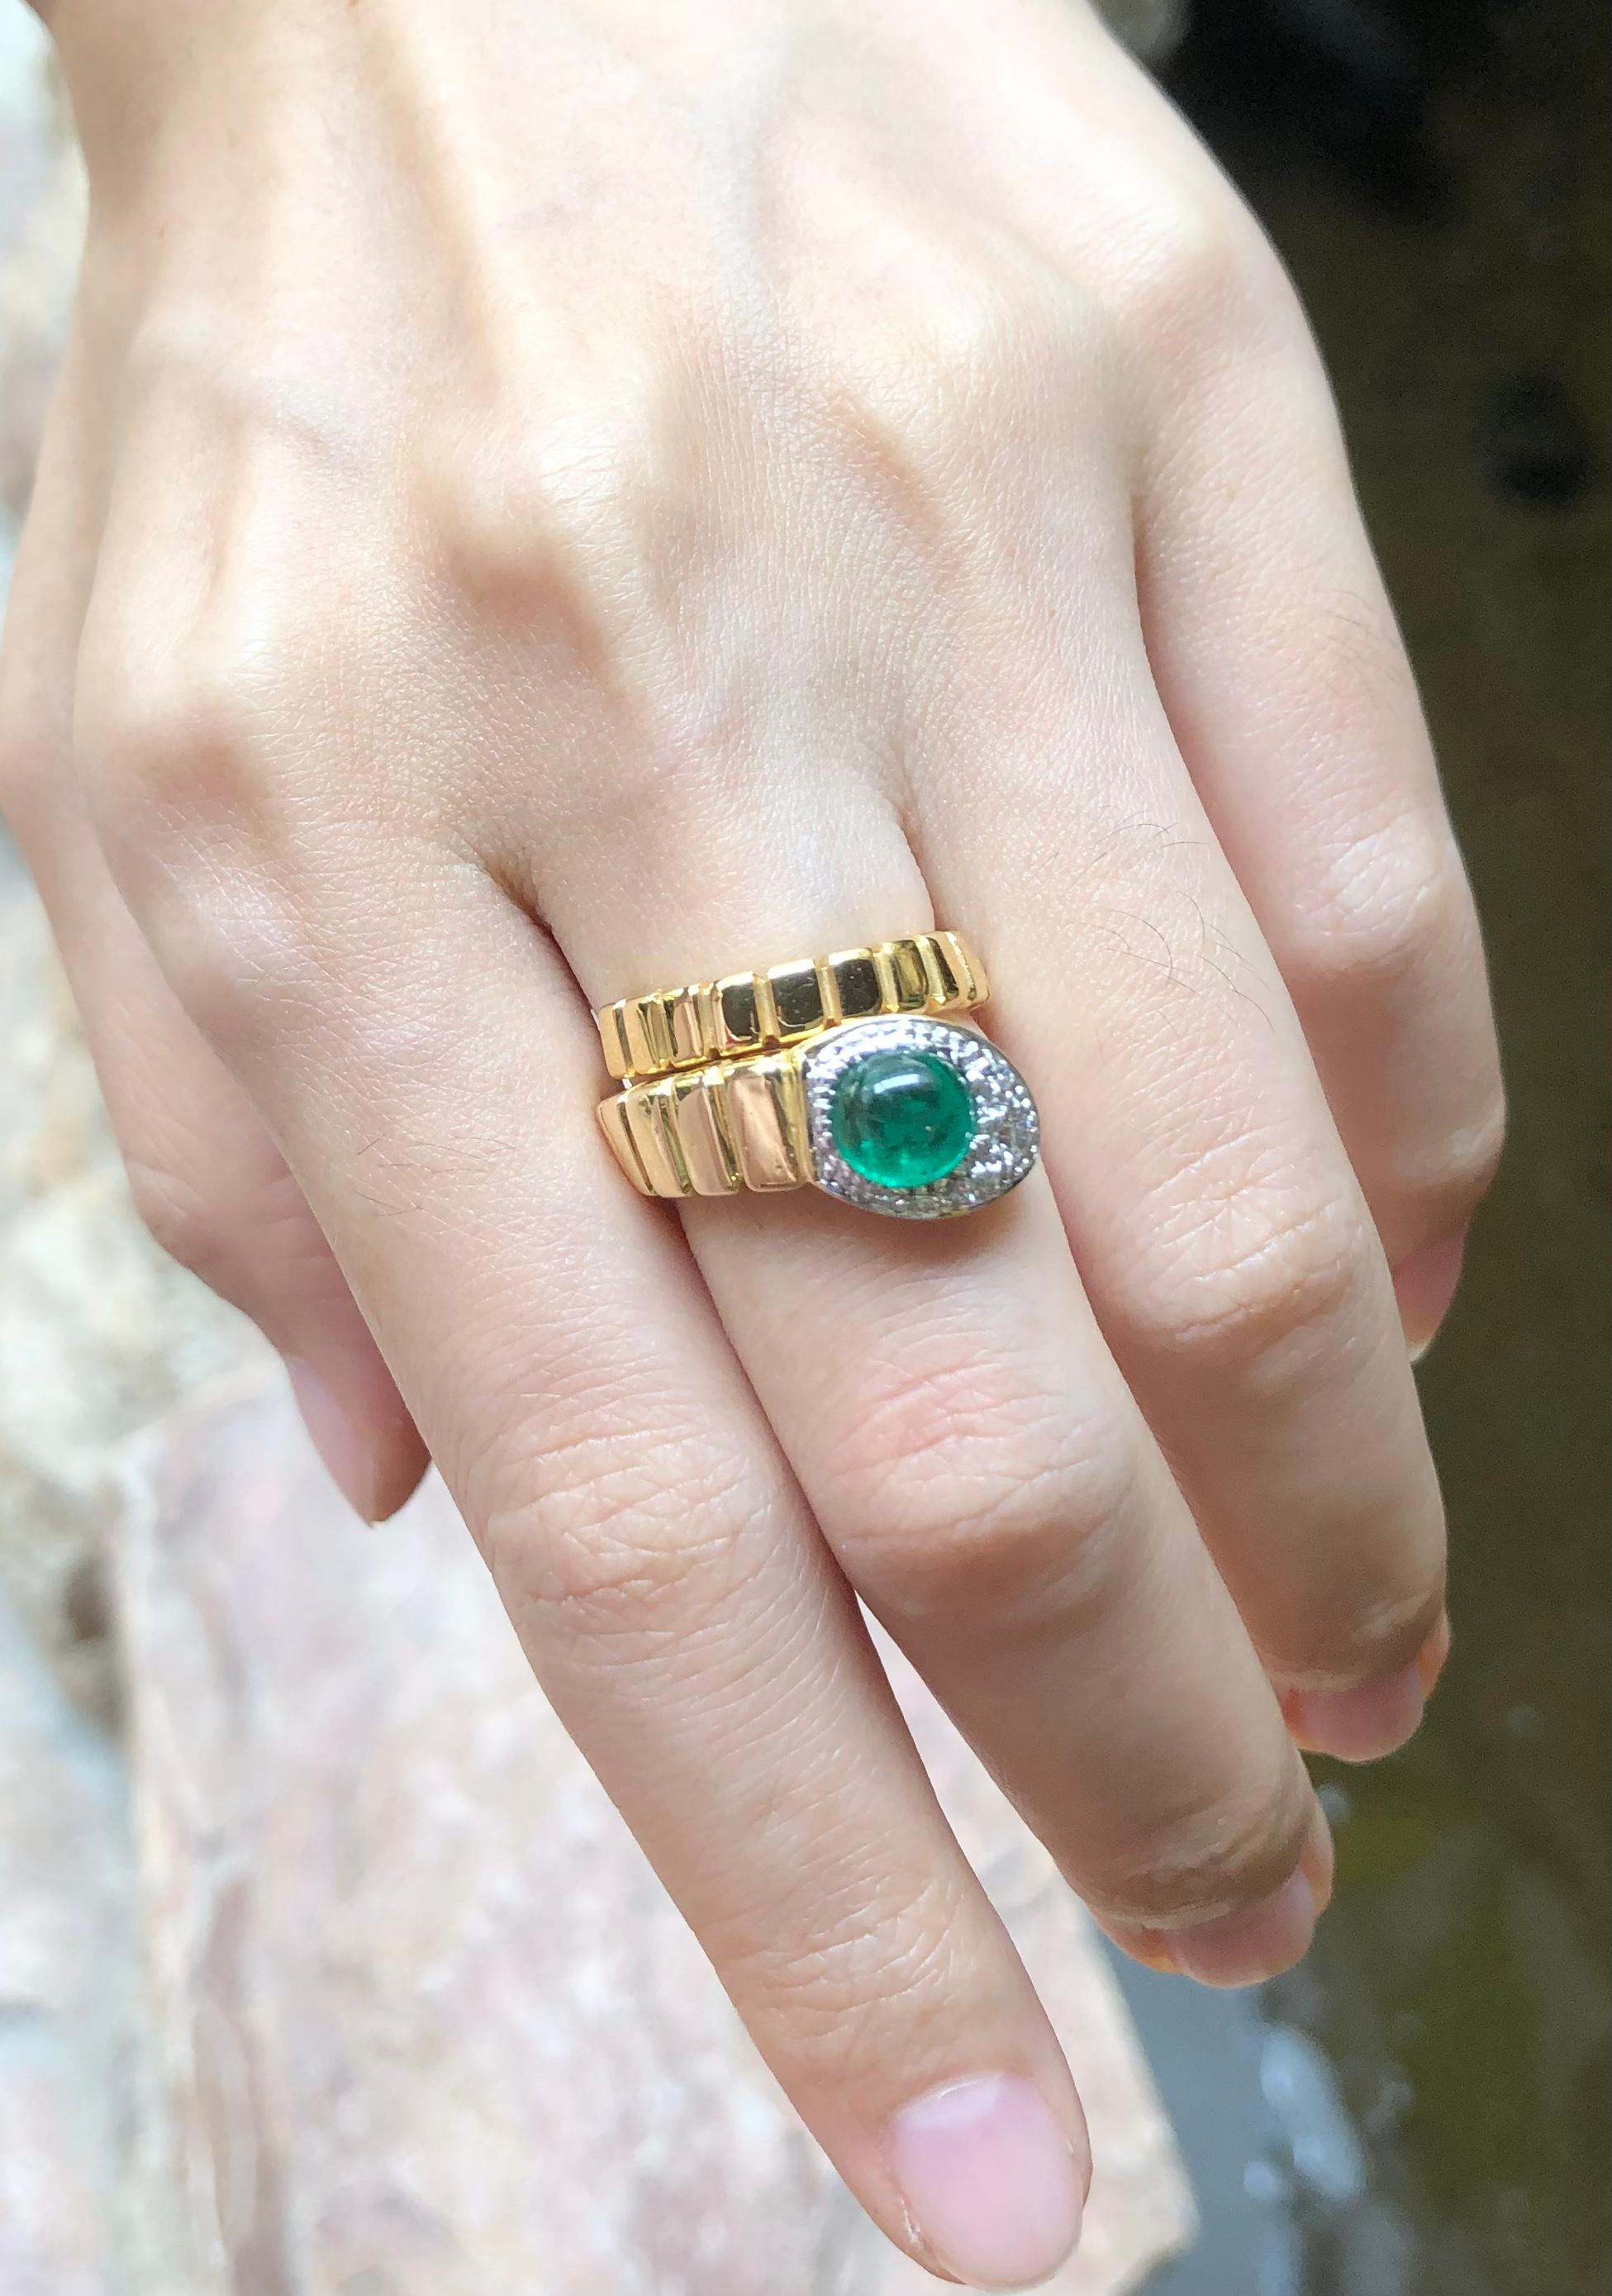 Cabochon Emerald 1.24 carats with Diamond 0.06 carat Ring set in 18 Karat Gold Settings

Width:  1.9 cm 
Length: 1.4 cm
Ring Size: 50
Total Weight: 11.48 grams

